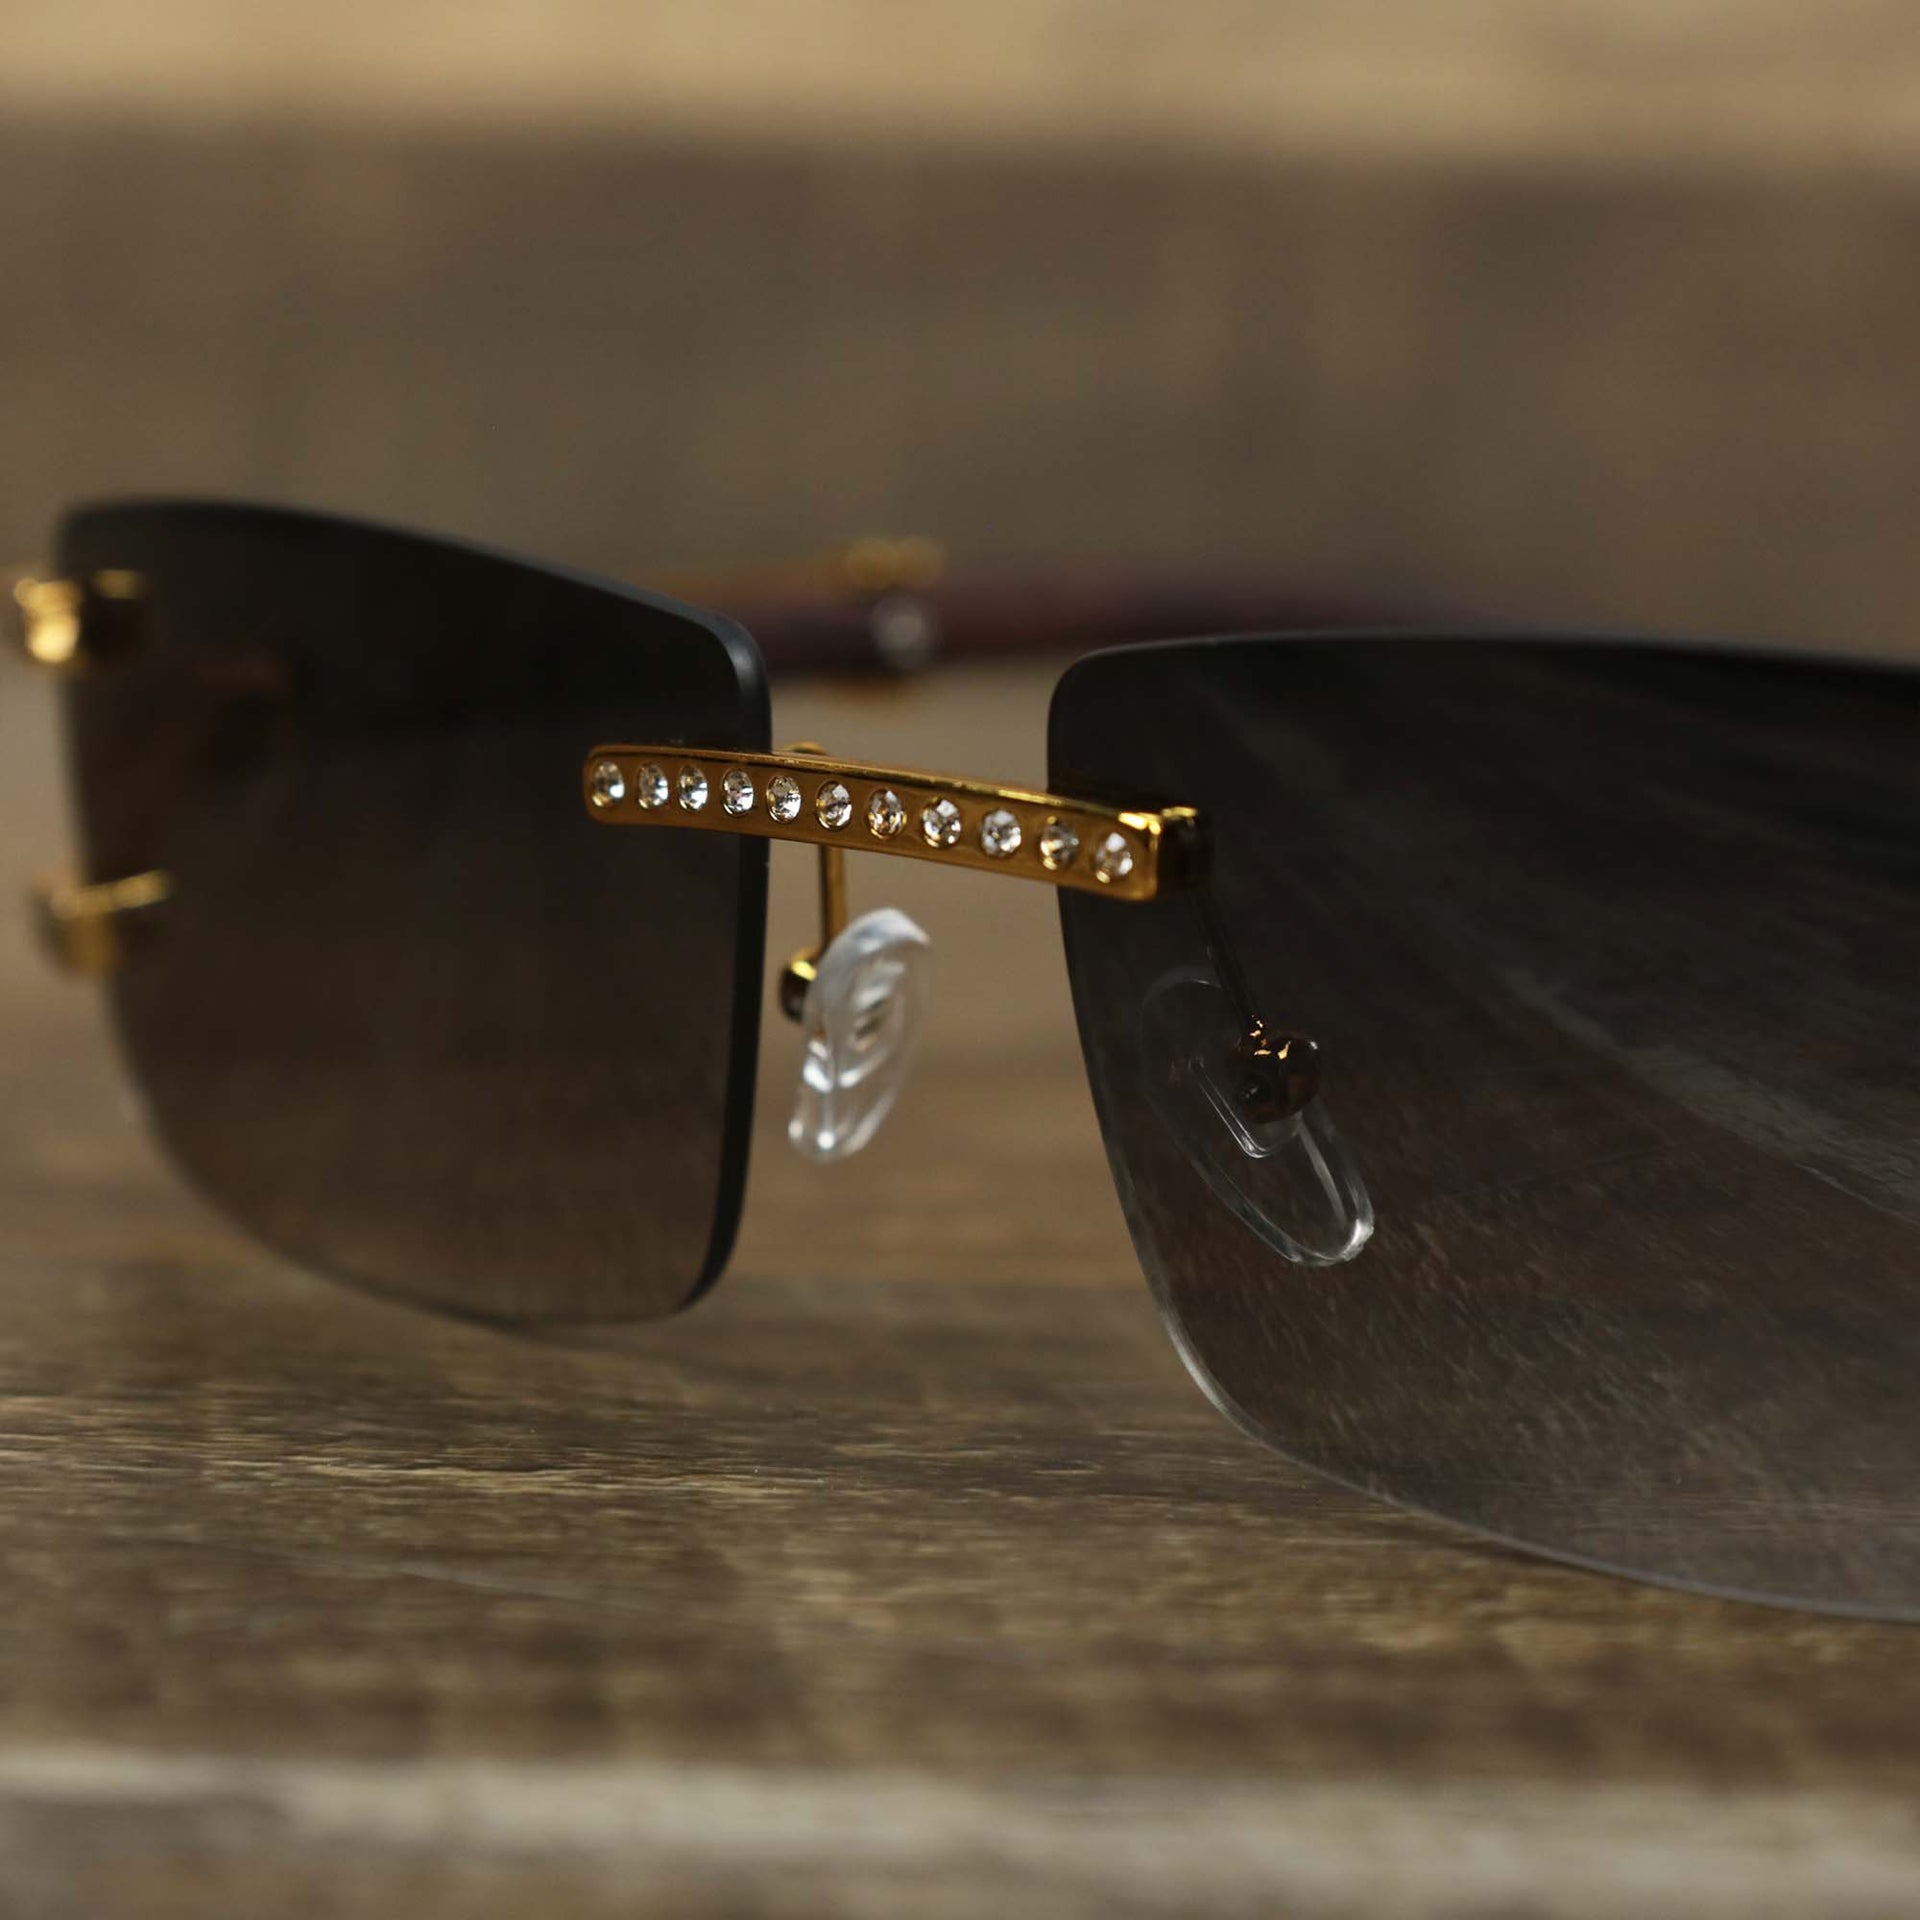 The bridge of the Rectangle Frames Black Gradient Lens Flooded Sunglasses with Gold Frame